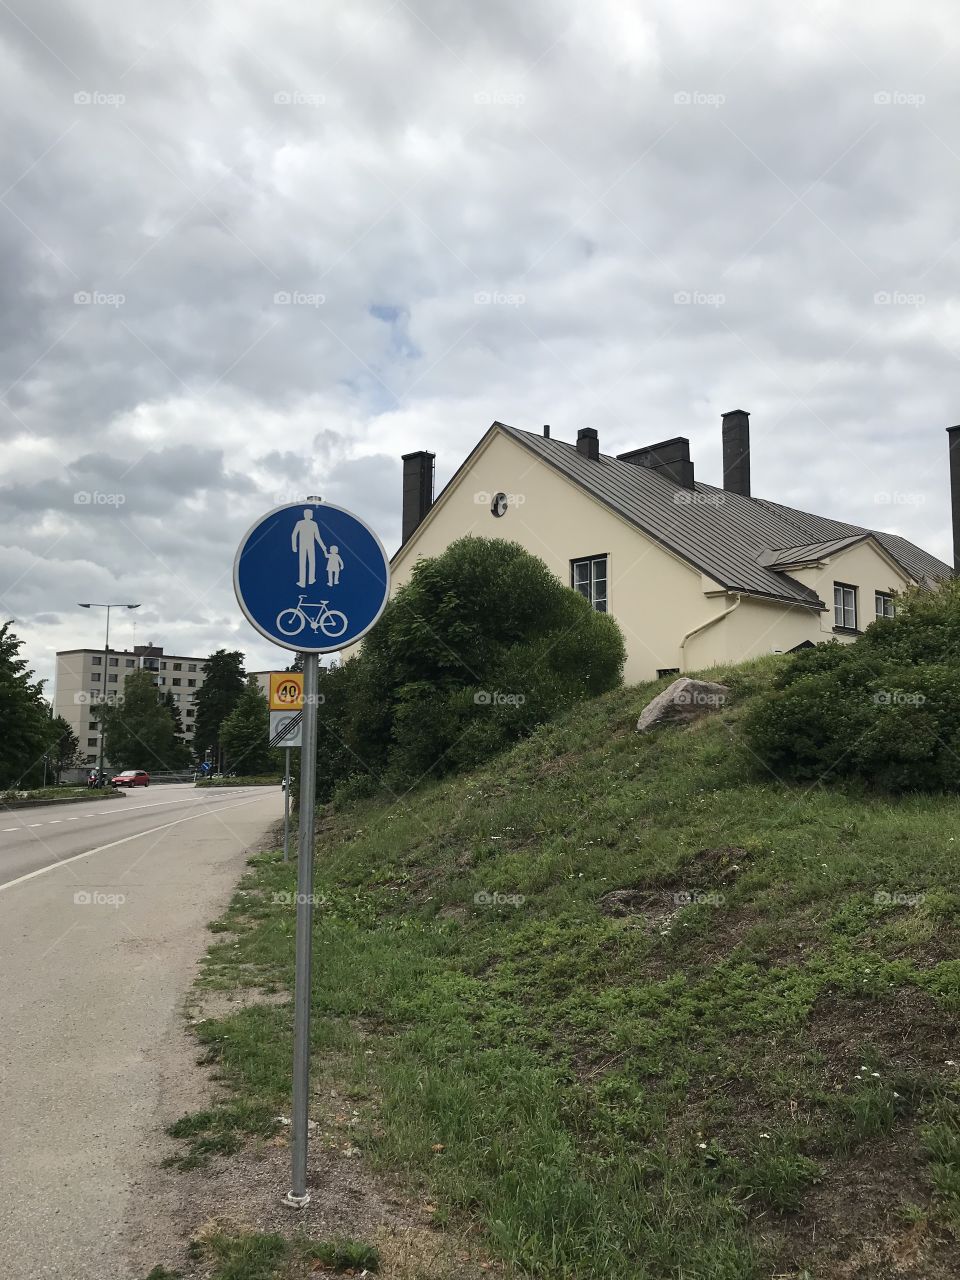 Imatra, 🇫🇮 The people in Imatra can only be seen on road signs))